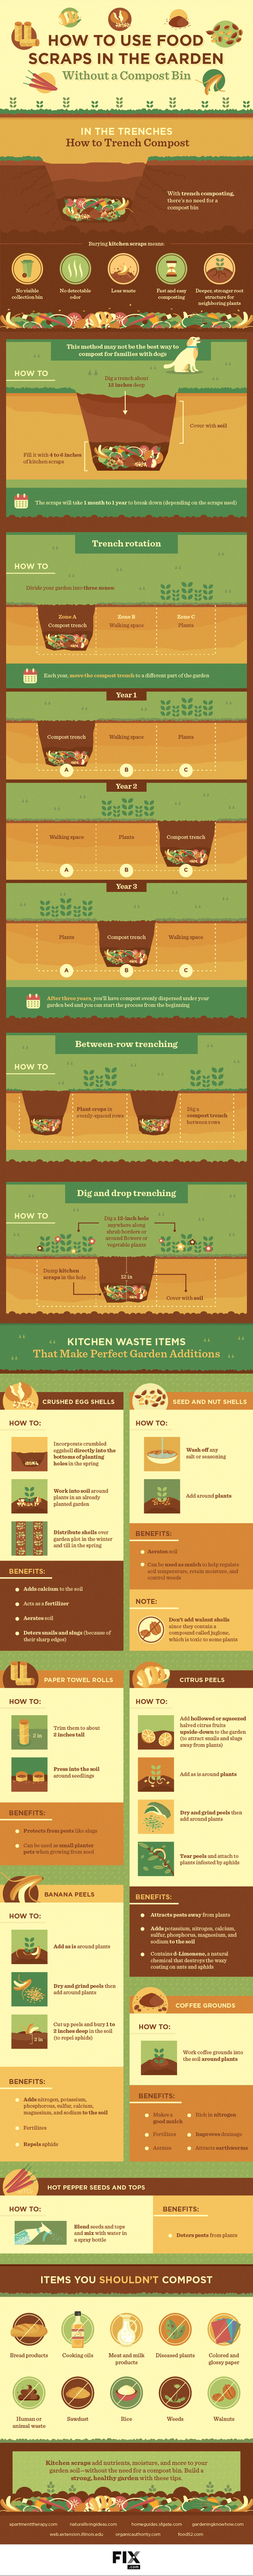 How to use food scraps in the garden - infographic